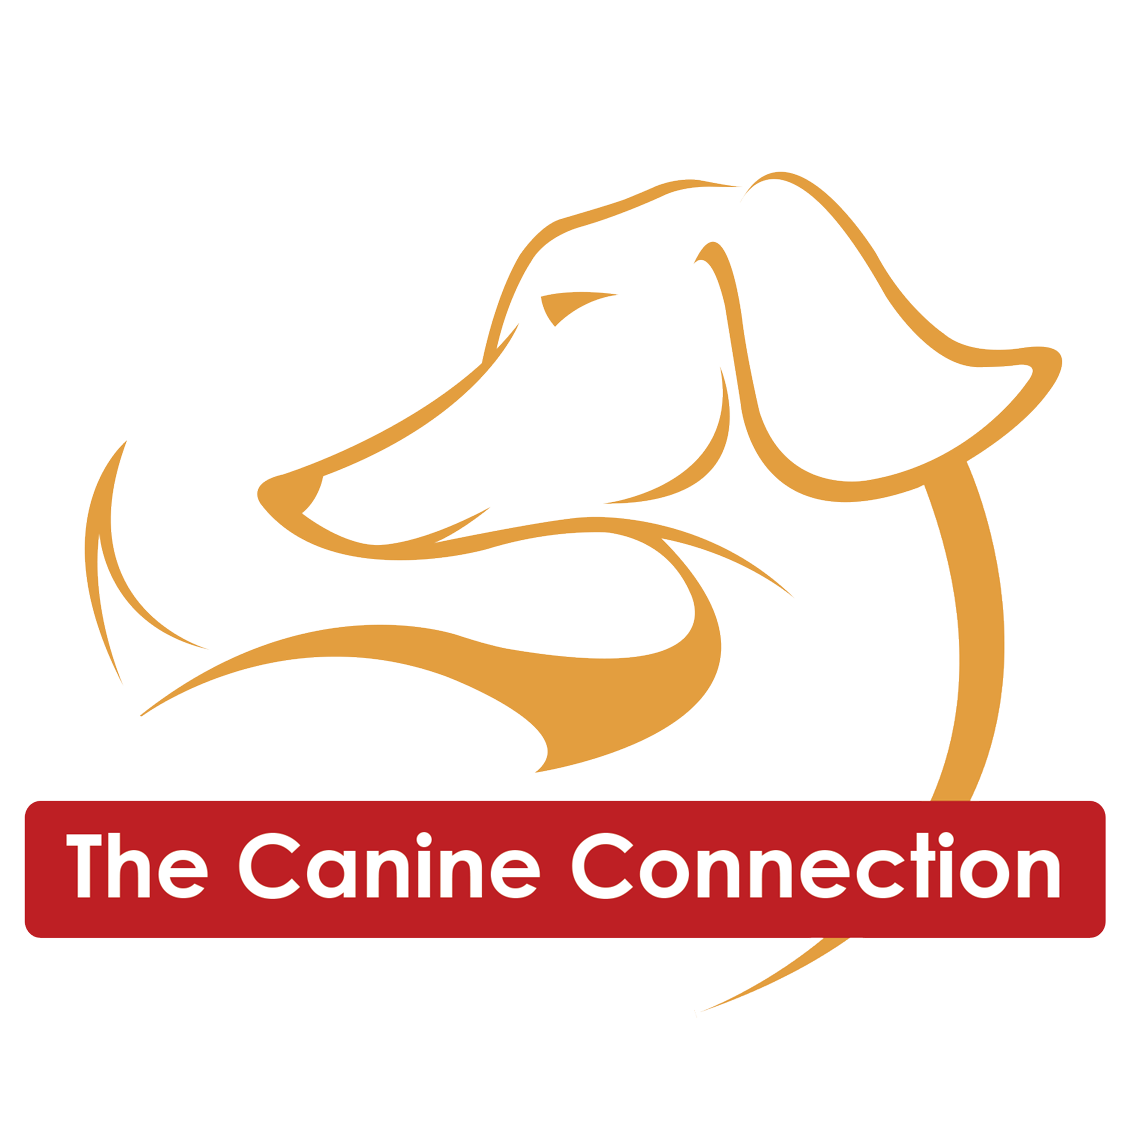 The Canine Connection, LLC